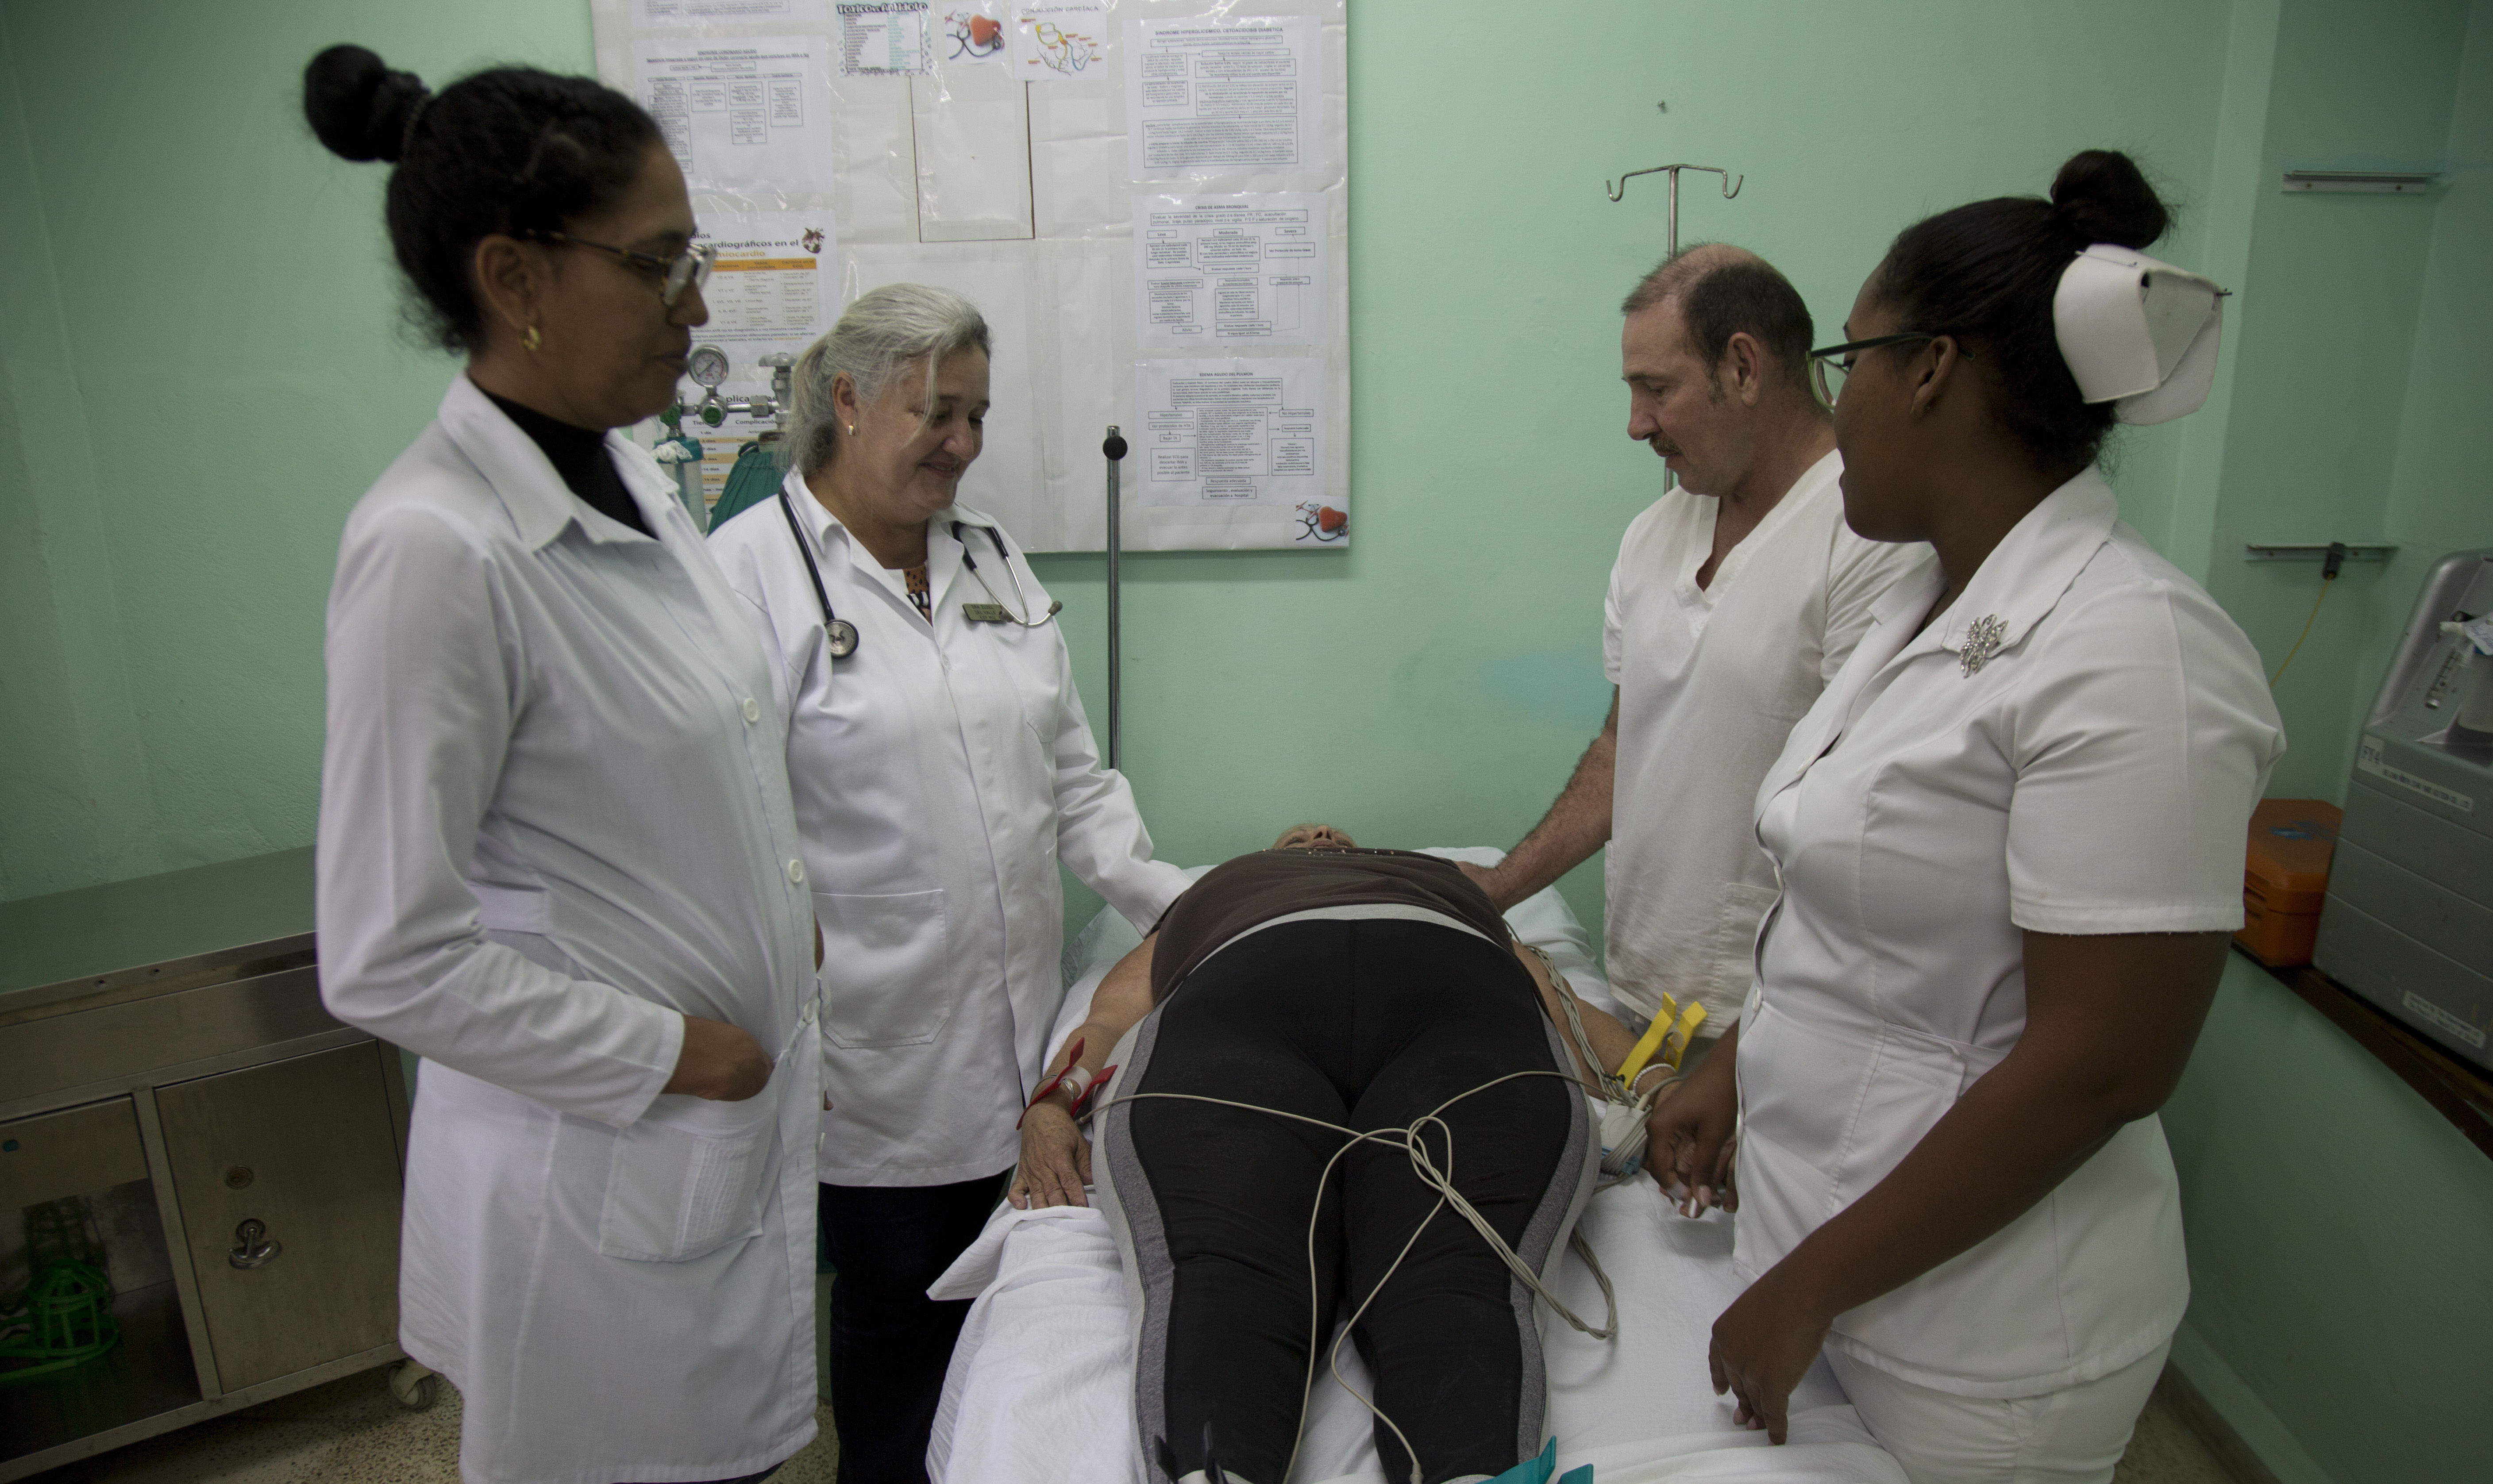 Nurses, technicians and specialists stand around a patient at a polyclinic in Havana, Cuba, Wednesday, Feb. 12, 2020.  Hundreds of neighborhood clinics are the front-line defense against contagious diseases in Cuba, providing care to patients seeking relief from colds, aches and minor injuries. (AP Photo/Ismael Francisco)